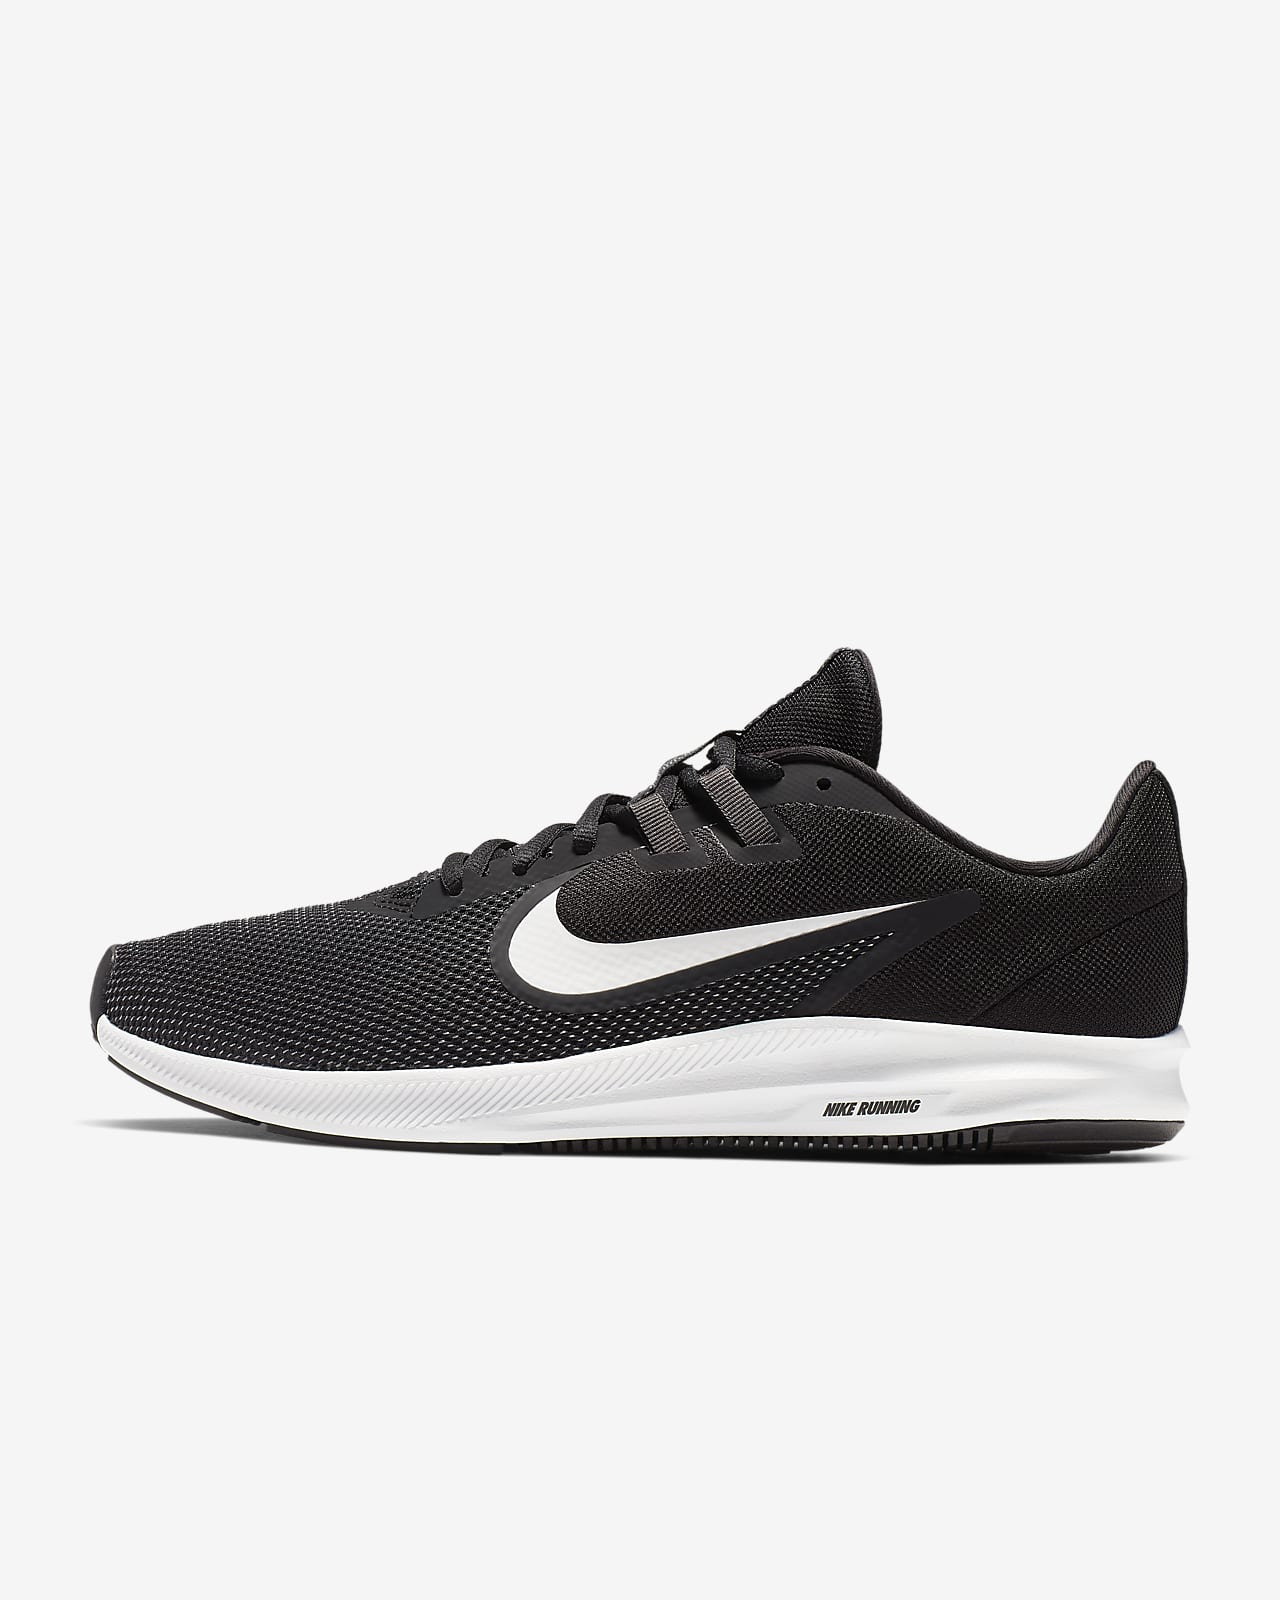 nike cortez black and white suede